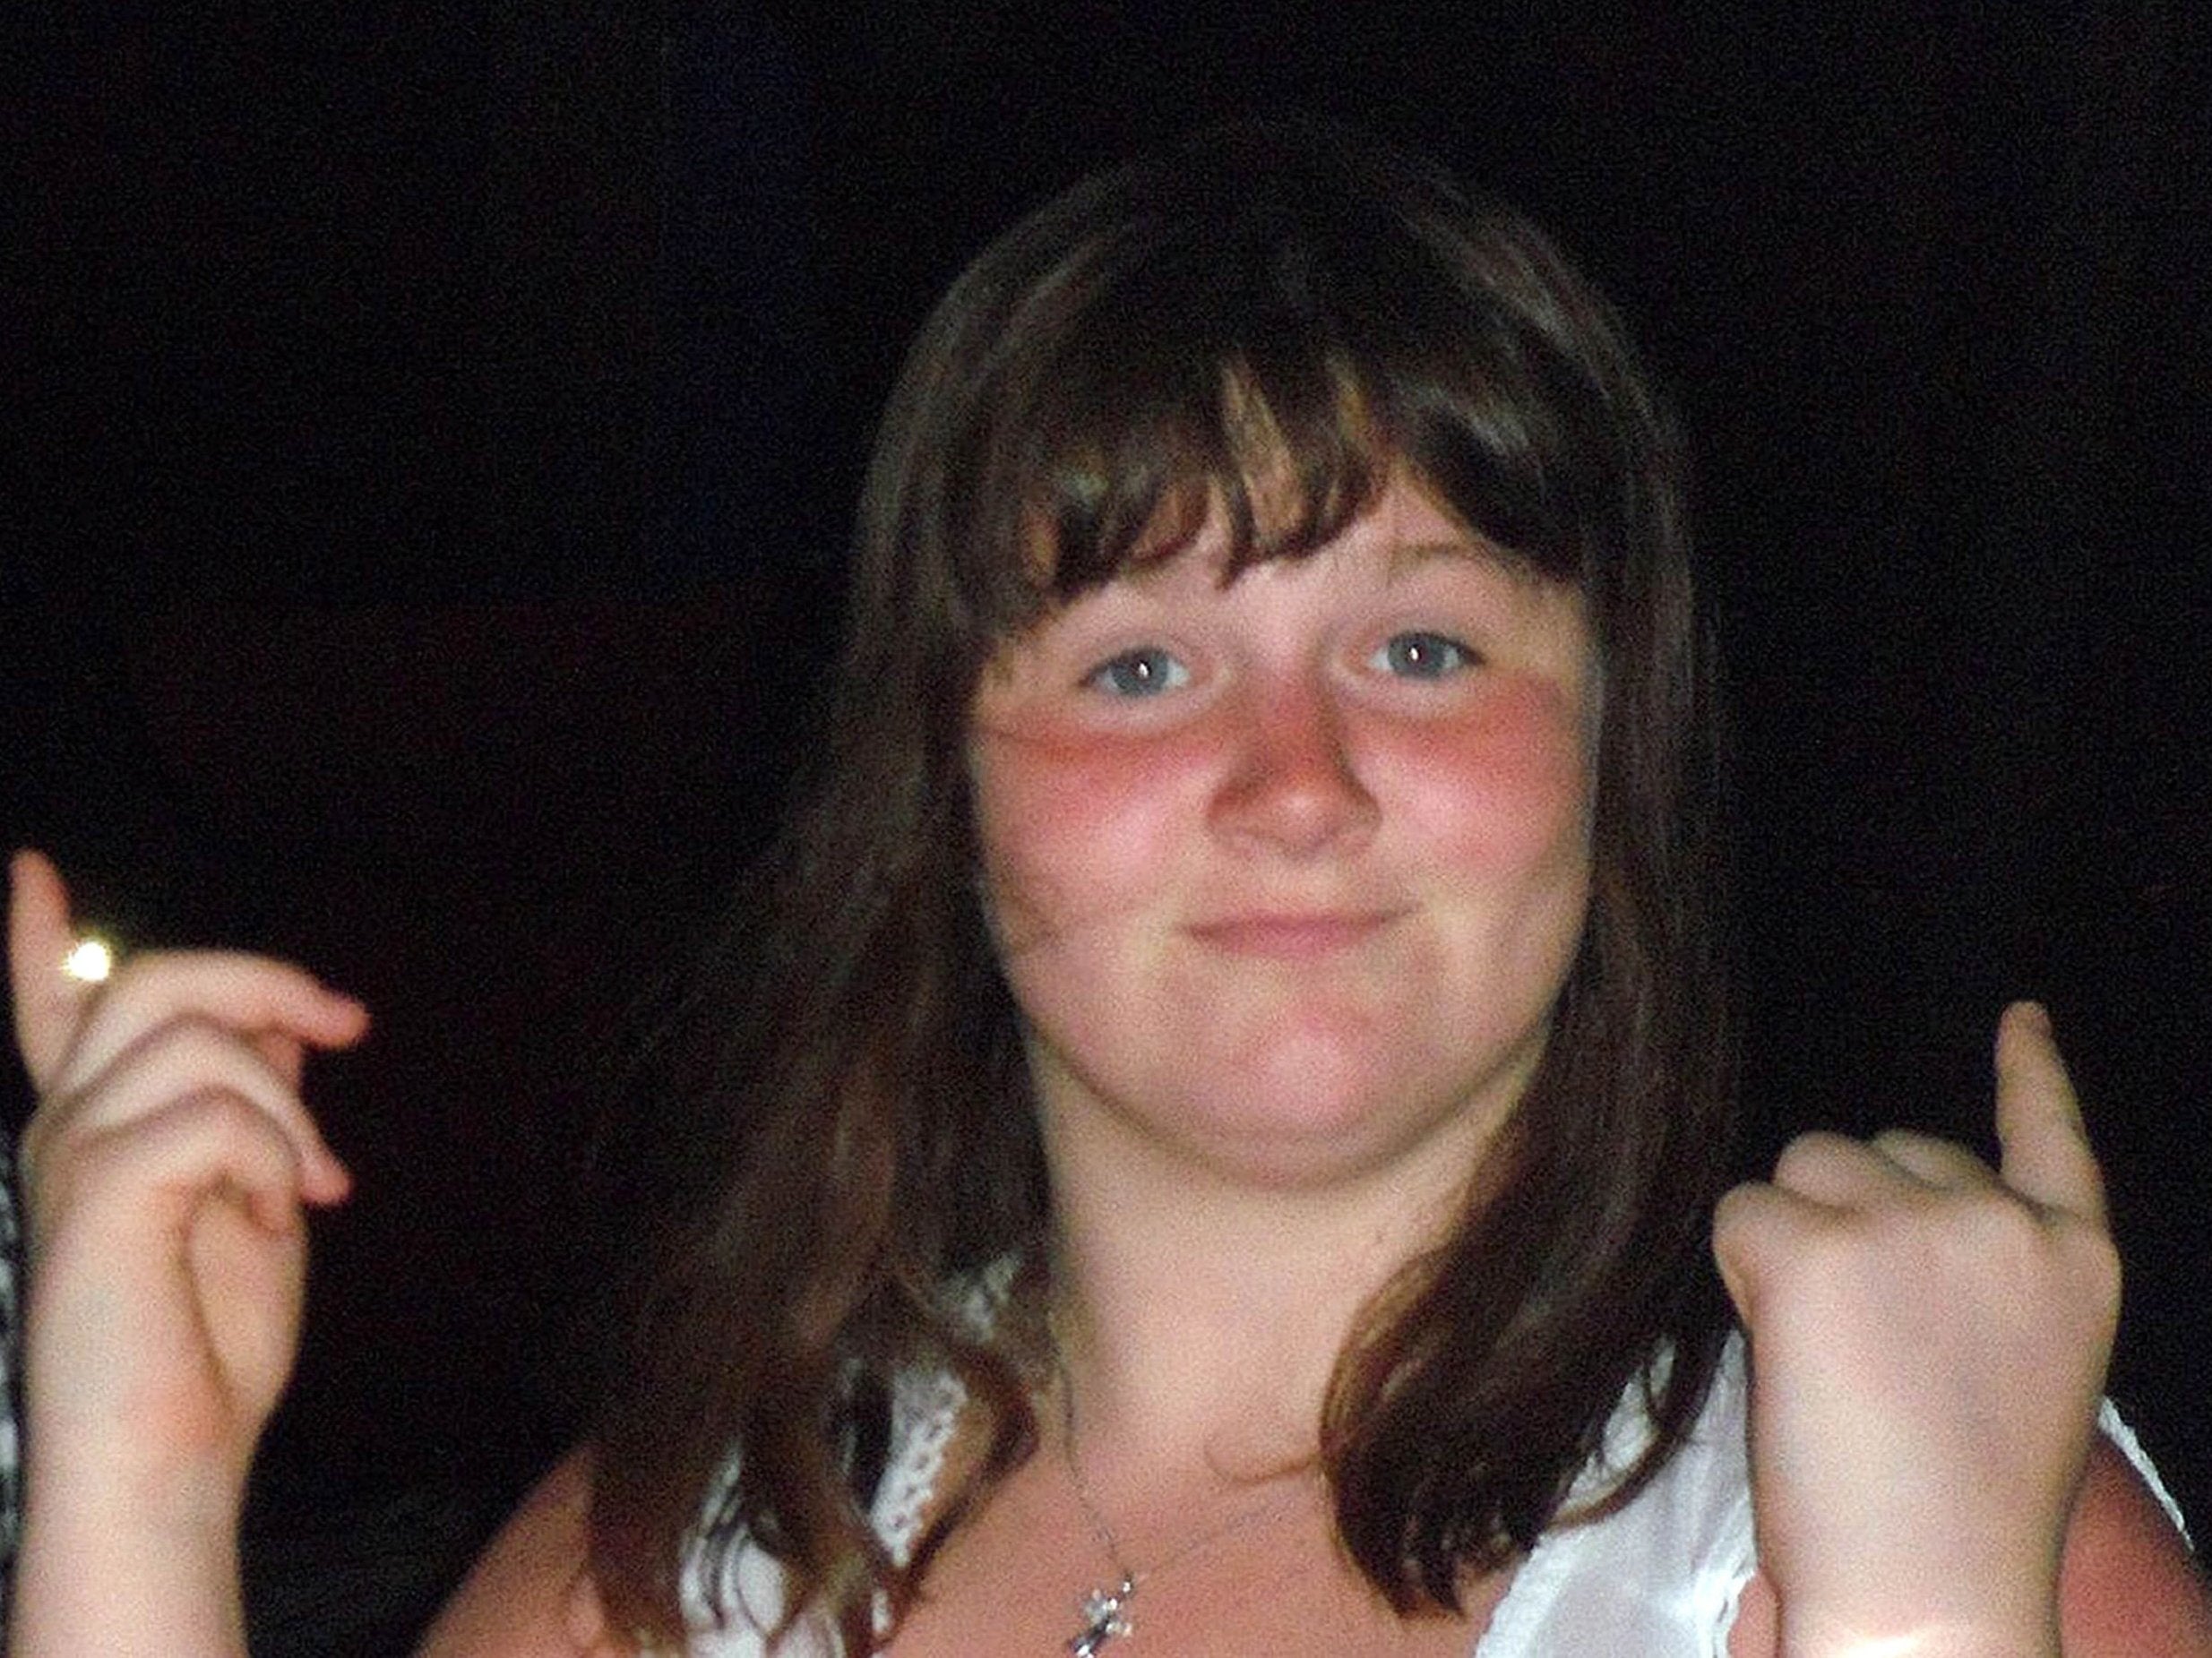 Amy El-Keria was being treated at the private mental healthcare group's Ticehurst House psychiatric hospital in East Sussex when she died in November 2012